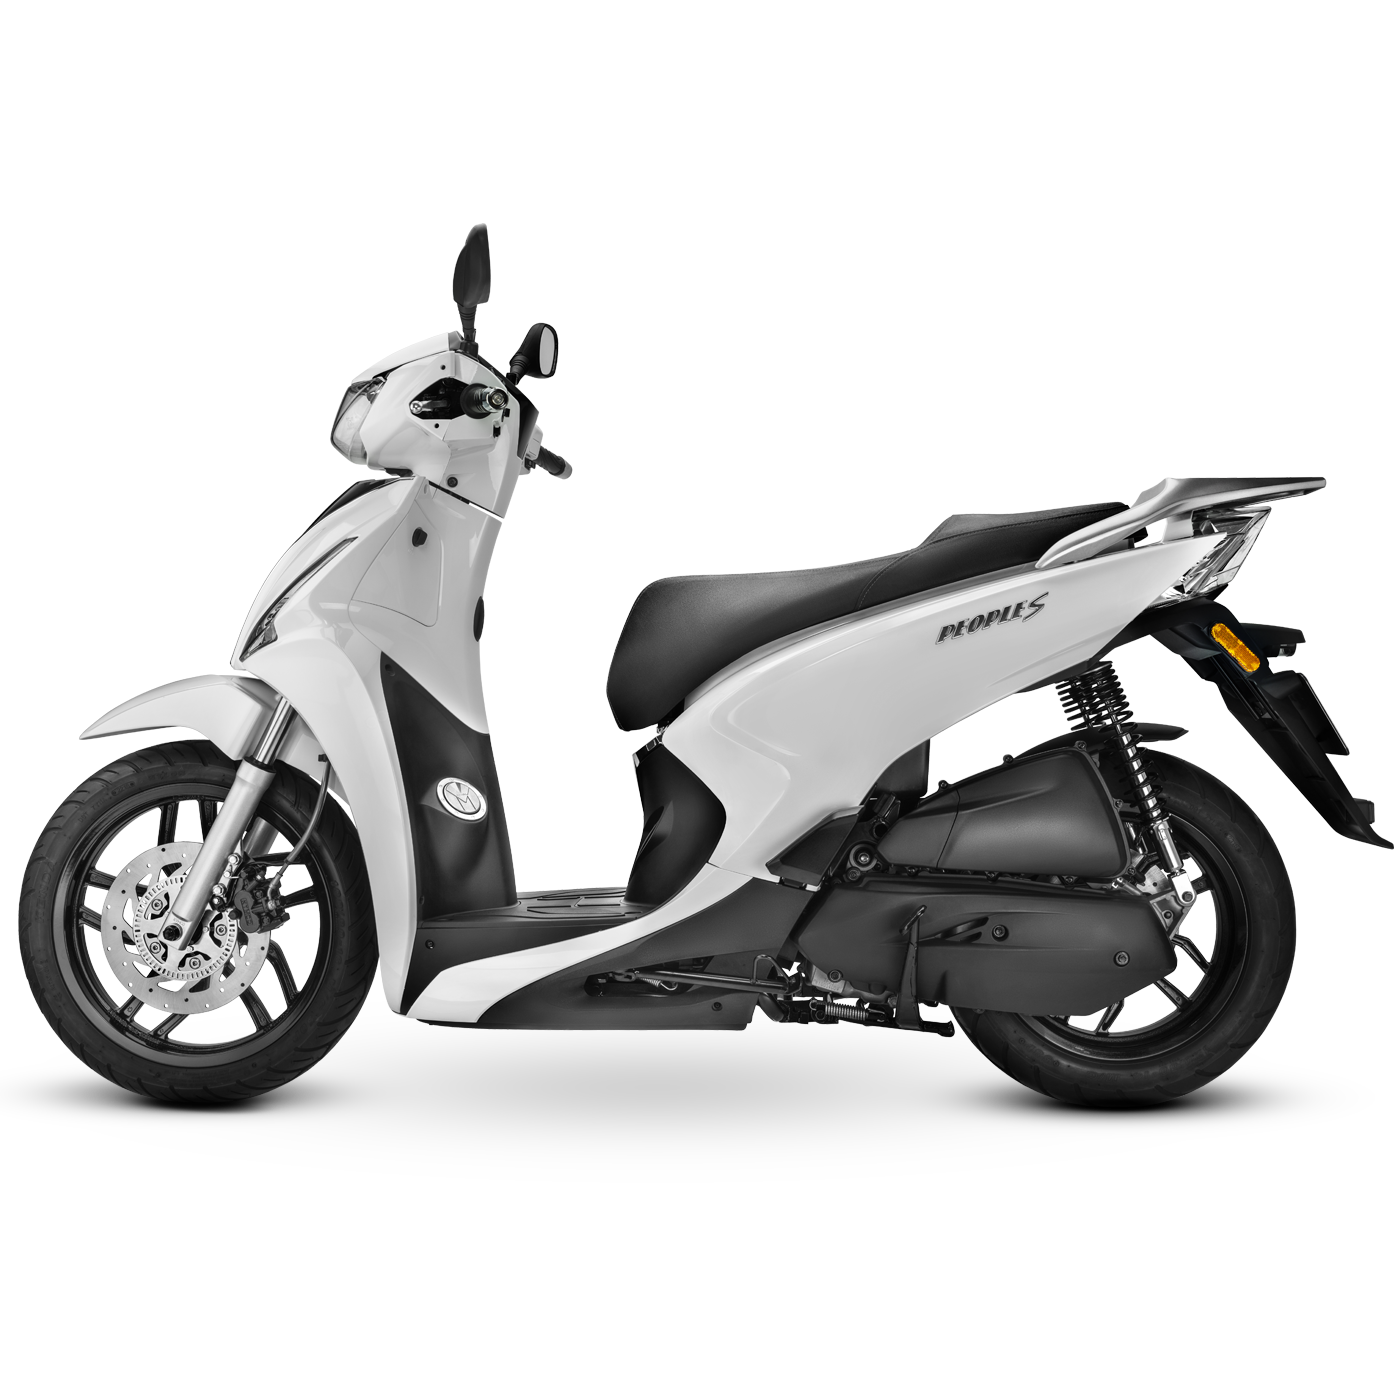 Suelto rescate gemelo People S 125 ABS KYMCO, Scooter moto 125cc